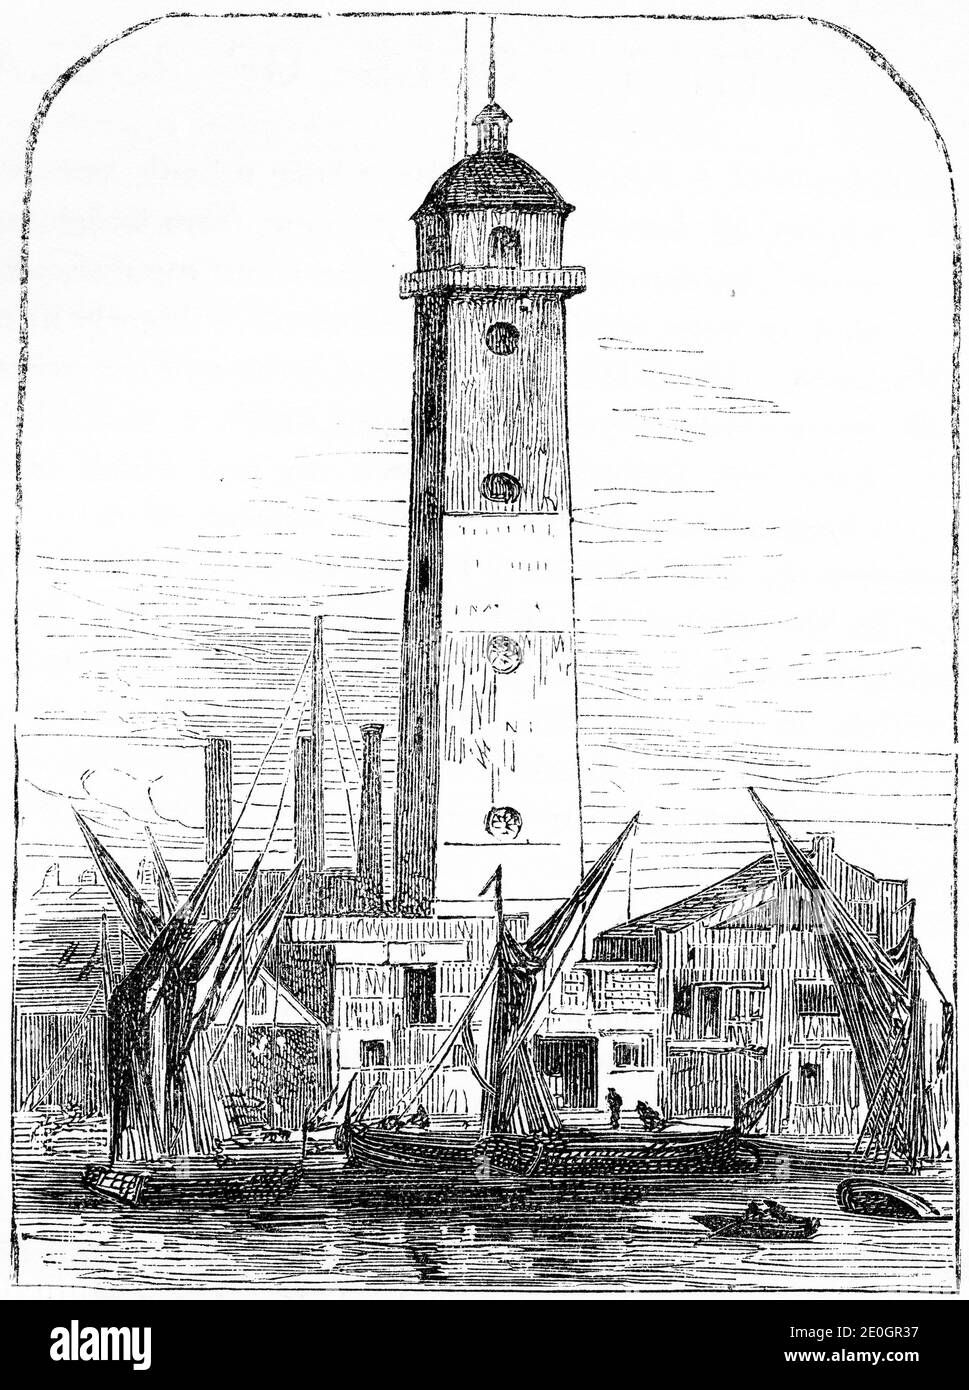 Engraving of the Shot Tower at the Lambeth Lead Works where a couple of old men made lead shot for shotgun cartridges by dropping molten lead from the top of the tower into a bucket of cold water at the bottom. The tower stood on the South Bank of the River Thames in London, England, between Waterloo Bridge and Hungerford Bridge, on the site of what is now the Queen Elizabeth Hall.   (See other images of work inside.) Stock Photo